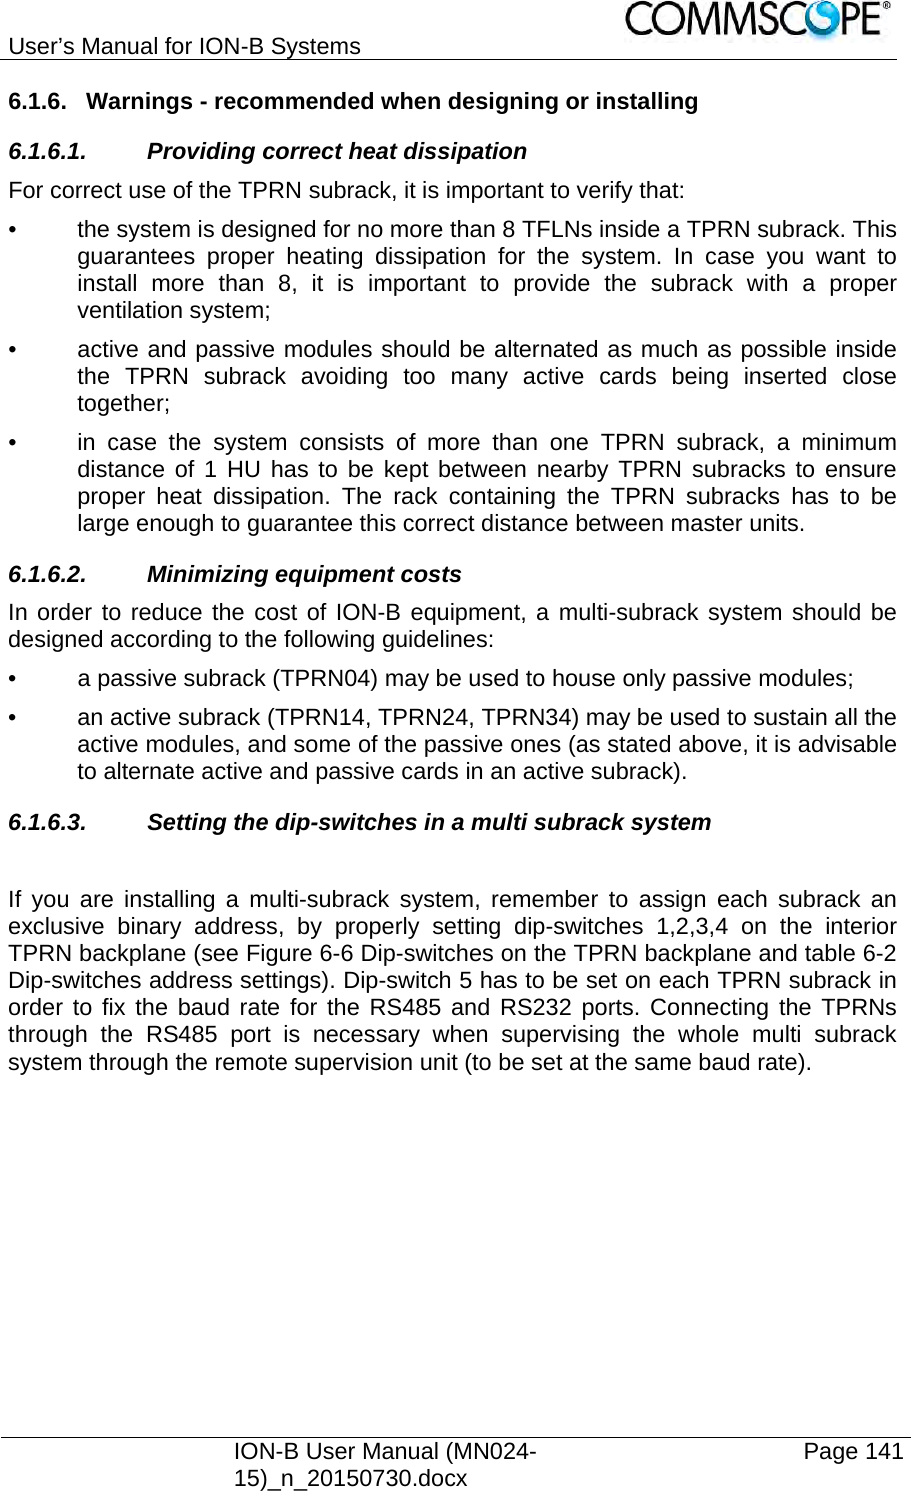 User’s Manual for ION-B Systems    ION-B User Manual (MN024-15)_n_20150730.docx  Page 141 6.1.6.  Warnings - recommended when designing or installing 6.1.6.1.  Providing correct heat dissipation For correct use of the TPRN subrack, it is important to verify that: •  the system is designed for no more than 8 TFLNs inside a TPRN subrack. This guarantees proper heating dissipation for the system. In case you want to install more than 8, it is important to provide the subrack with a proper ventilation system; •  active and passive modules should be alternated as much as possible inside the TPRN subrack avoiding too many active cards being inserted close together; •  in case the system consists of more than one TPRN subrack, a minimum distance of 1 HU has to be kept between nearby TPRN subracks to ensure proper heat dissipation. The rack containing the TPRN subracks has to be large enough to guarantee this correct distance between master units. 6.1.6.2.  Minimizing equipment costs In order to reduce the cost of ION-B equipment, a multi-subrack system should be designed according to the following guidelines: •  a passive subrack (TPRN04) may be used to house only passive modules; •  an active subrack (TPRN14, TPRN24, TPRN34) may be used to sustain all the active modules, and some of the passive ones (as stated above, it is advisable to alternate active and passive cards in an active subrack). 6.1.6.3.  Setting the dip-switches in a multi subrack system  If you are installing a multi-subrack system, remember to assign each subrack an exclusive binary address, by properly setting dip-switches 1,2,3,4 on the interior TPRN backplane (see Figure 6-6 Dip-switches on the TPRN backplane and table 6-2 Dip-switches address settings). Dip-switch 5 has to be set on each TPRN subrack in order to fix the baud rate for the RS485 and RS232 ports. Connecting the TPRNs through the RS485 port is necessary when supervising the whole multi subrack system through the remote supervision unit (to be set at the same baud rate).  